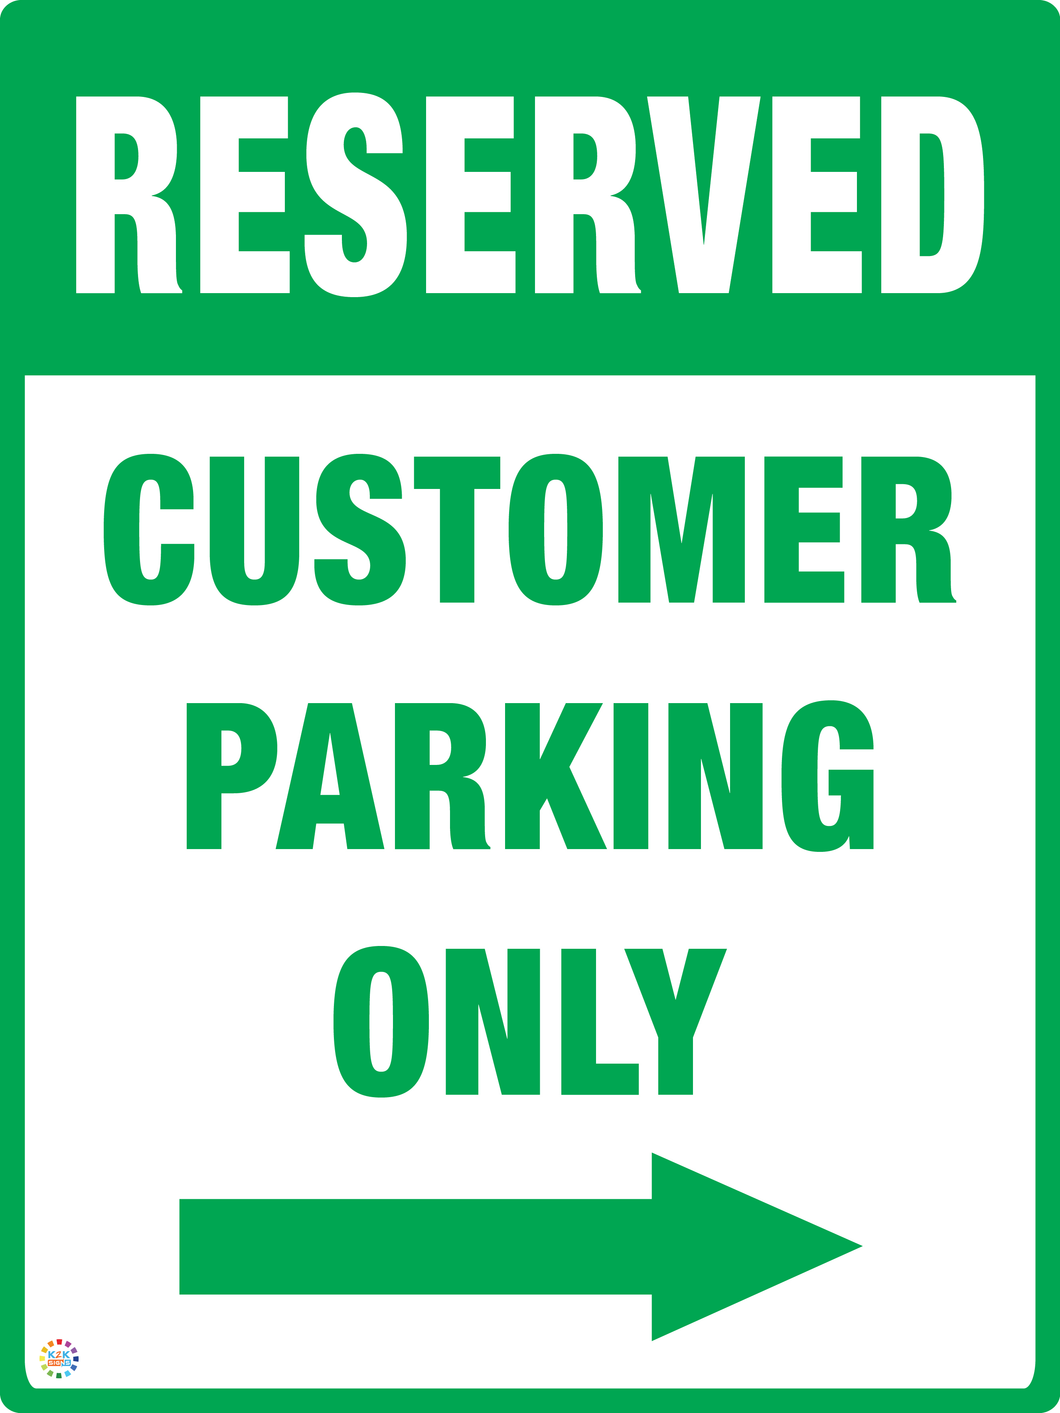 Reserved Customer Parking Only (Right Arrow) Sign